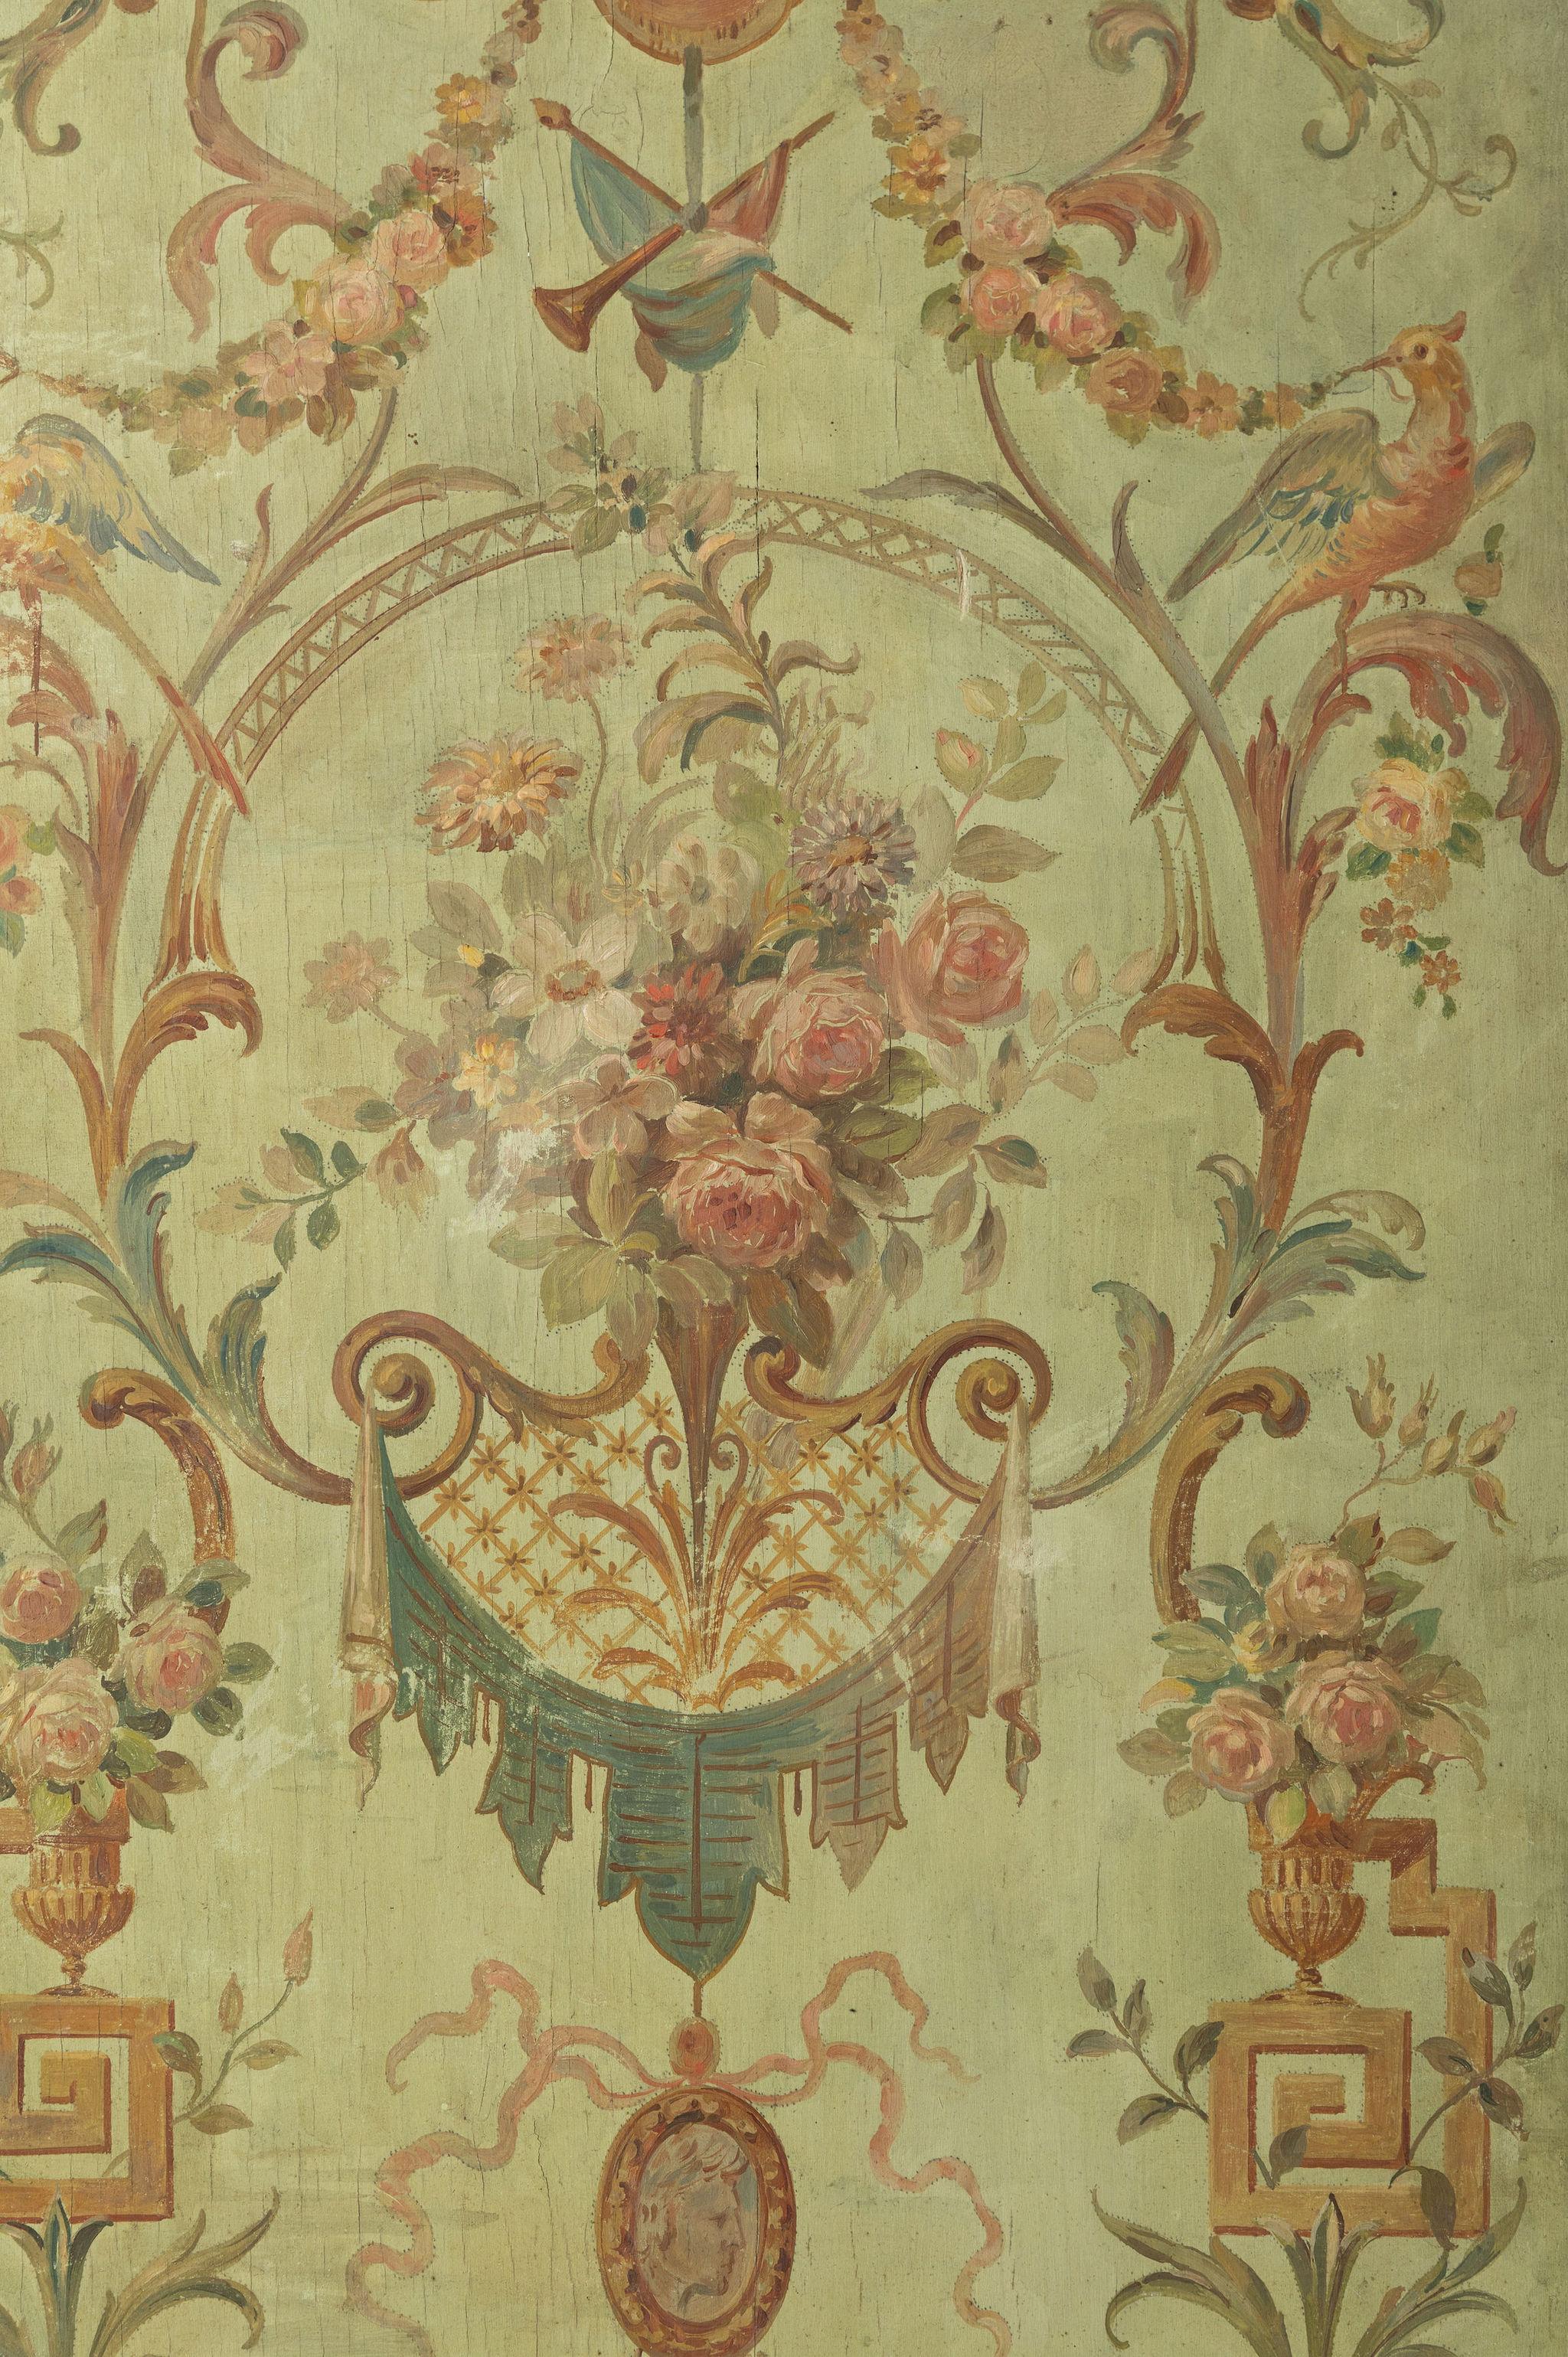 Late 19th Century / early 20th Century pair of antique French panels, oil on wood, pretty detail, soft colour tones.
Worn fabric on the back. 
A very pretty decorative pair of wall panels. Sourced in Provence. 